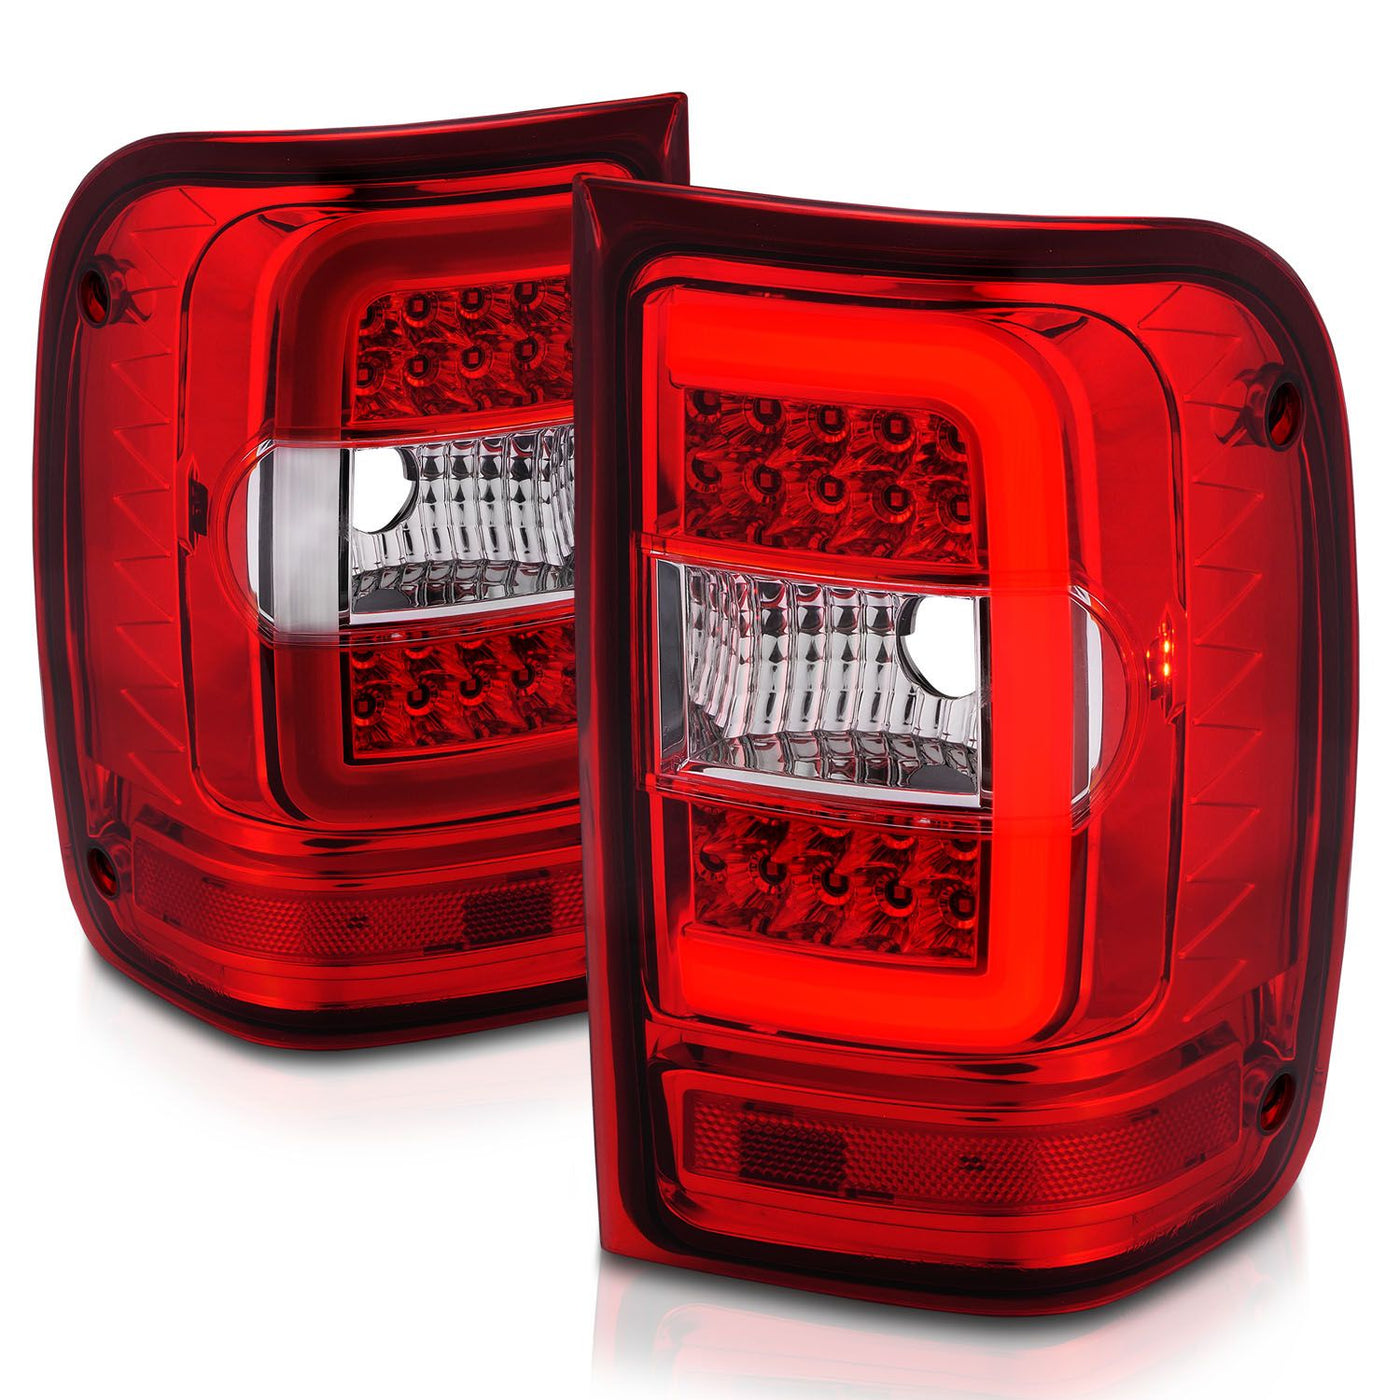 Ford Tail Lights, Ford Ranger Tail Lights, Ford 01-11 Tail Lights, Red Clear Chrome Tail Lights, Anzo Tail Lights,